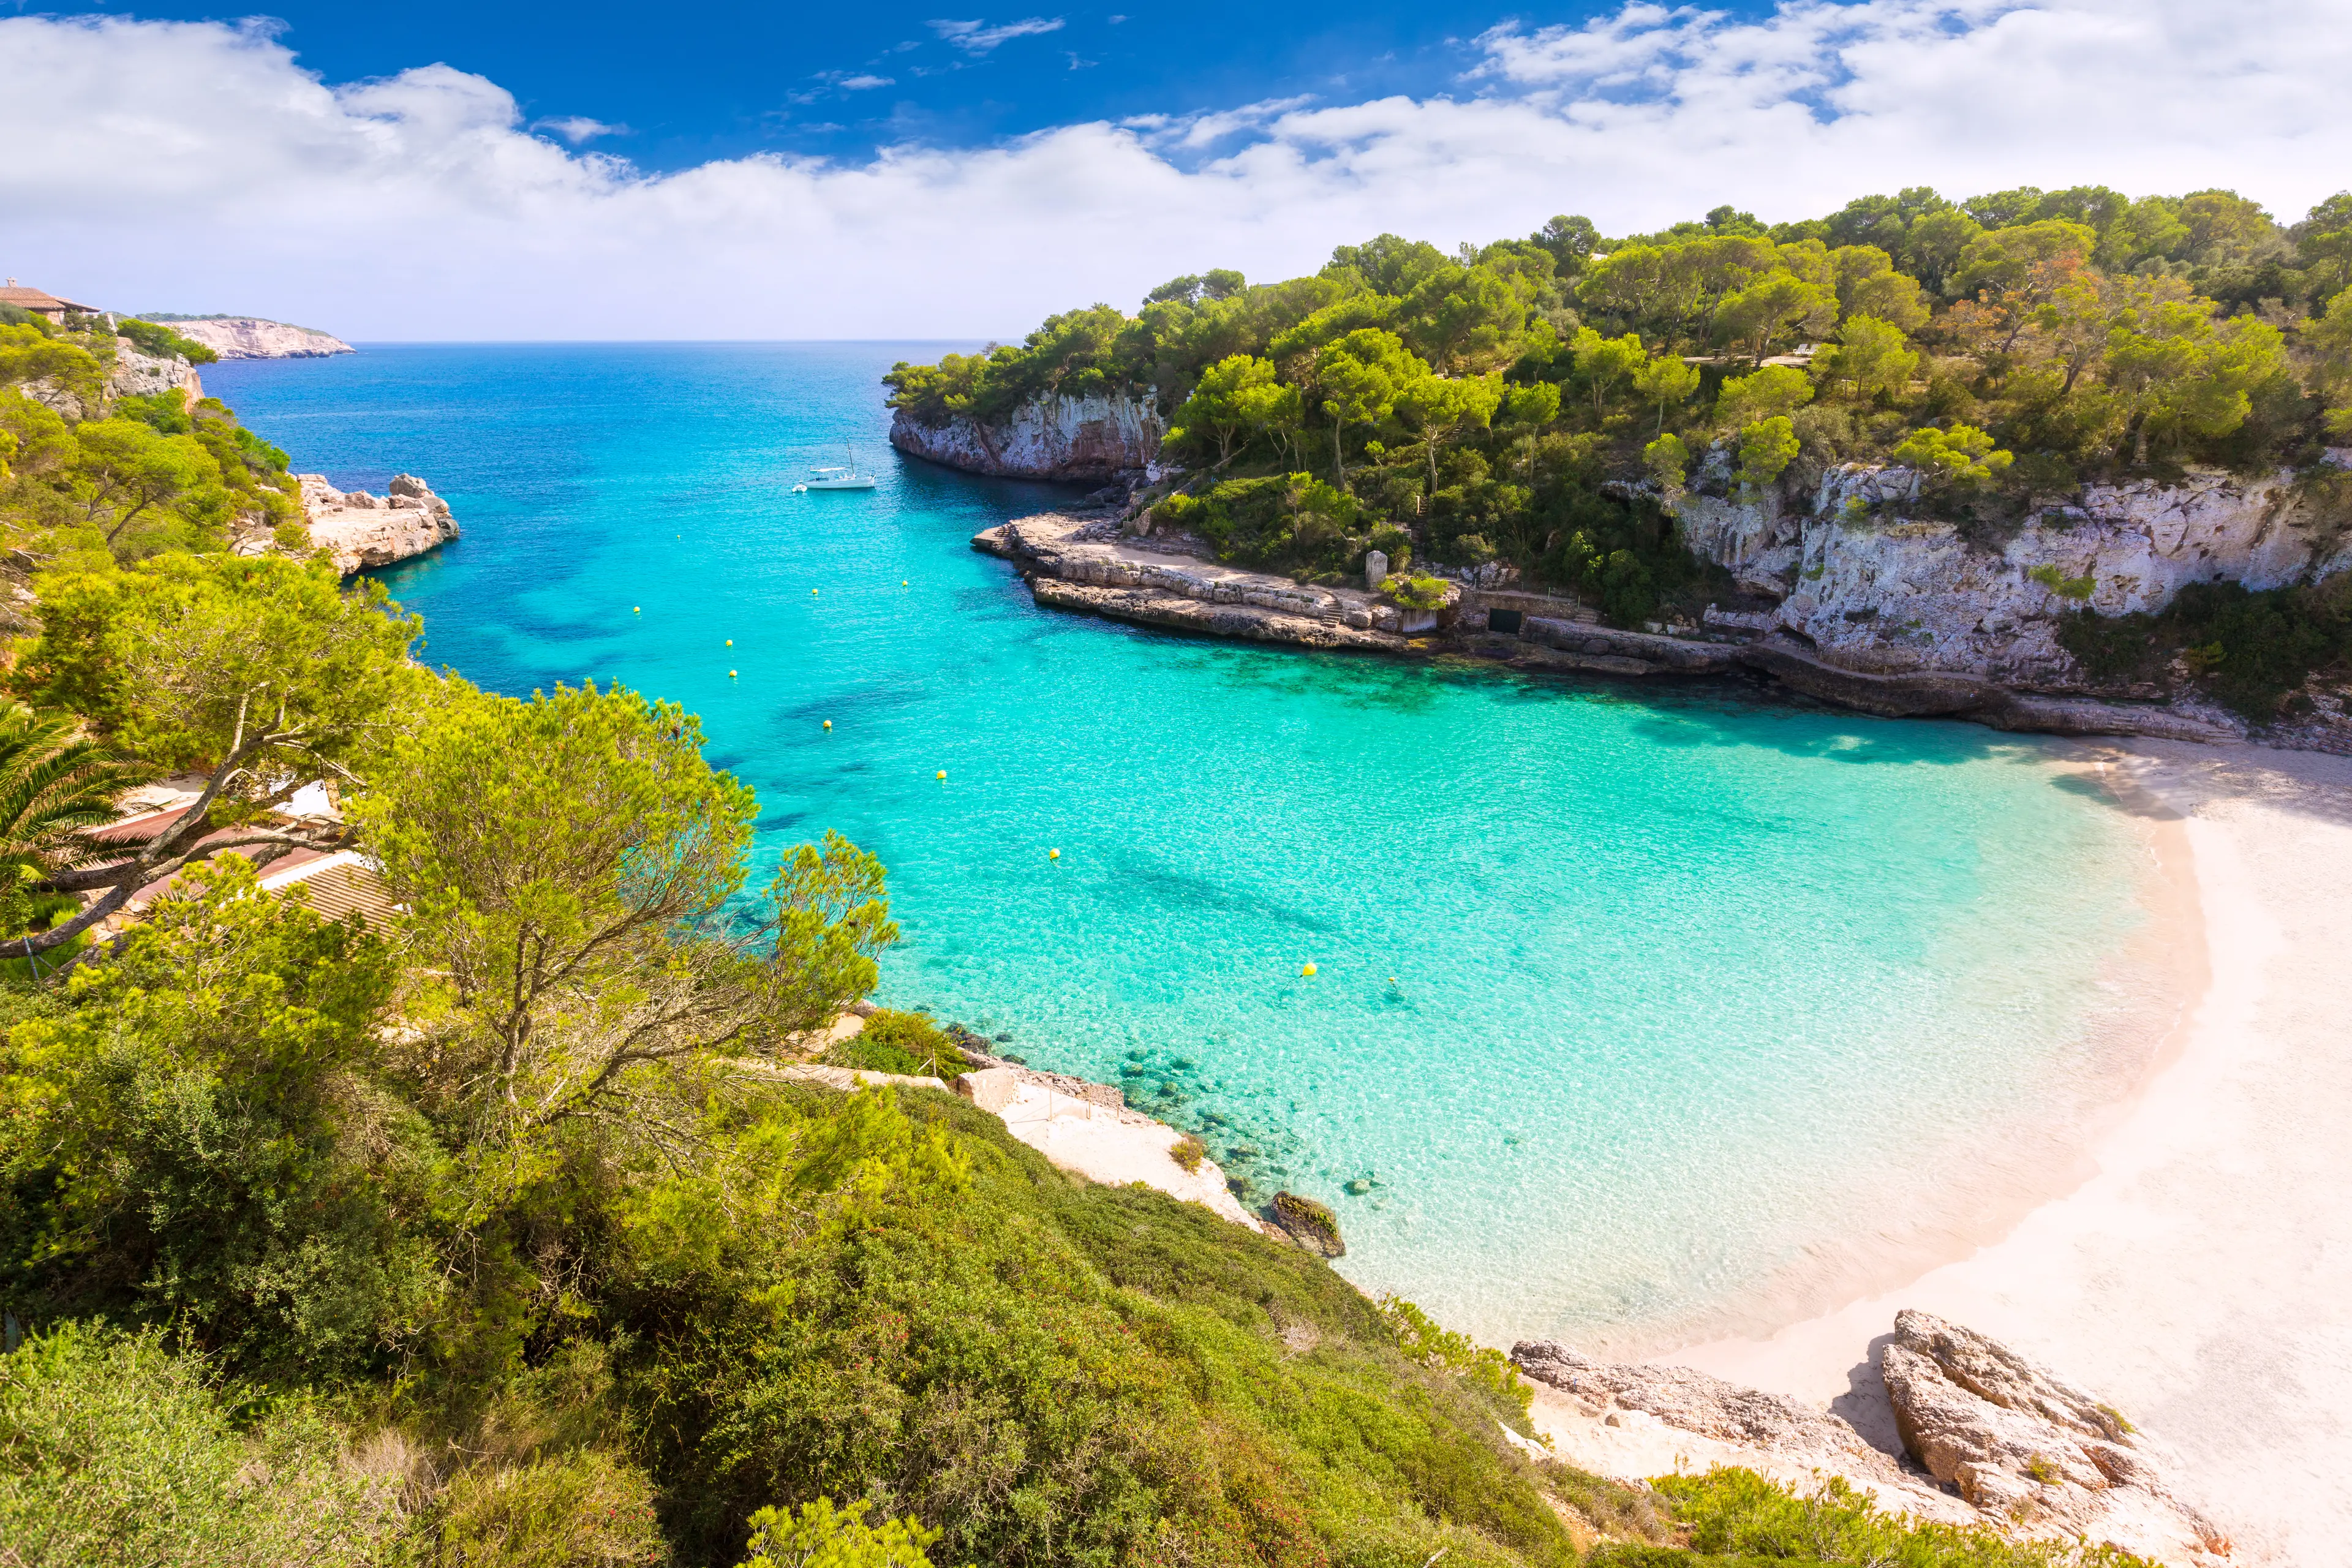 Romantic 3-Day Food, Wine & Relaxation Journey in Undiscovered Majorca